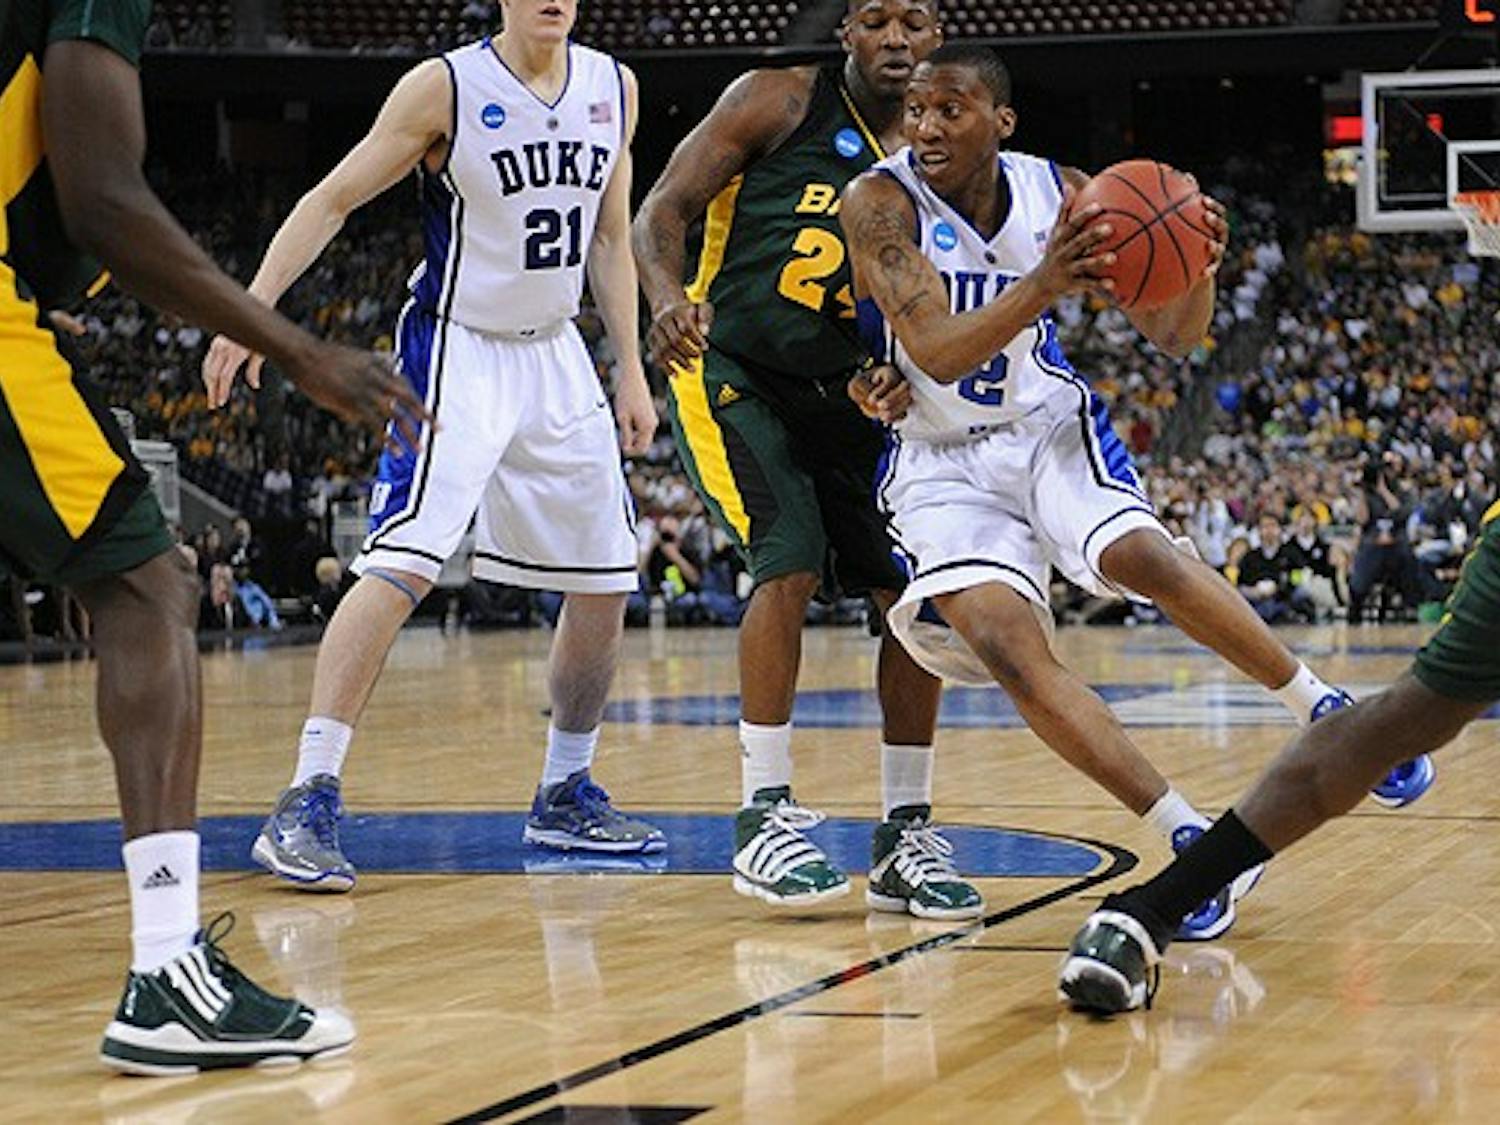 Junior Nolan Smith was able to penetrate the Baylor zone over and over, and that incisiveness created space for him and his perimeter-oriented teammates to either drive in or pull the trigger from outside.